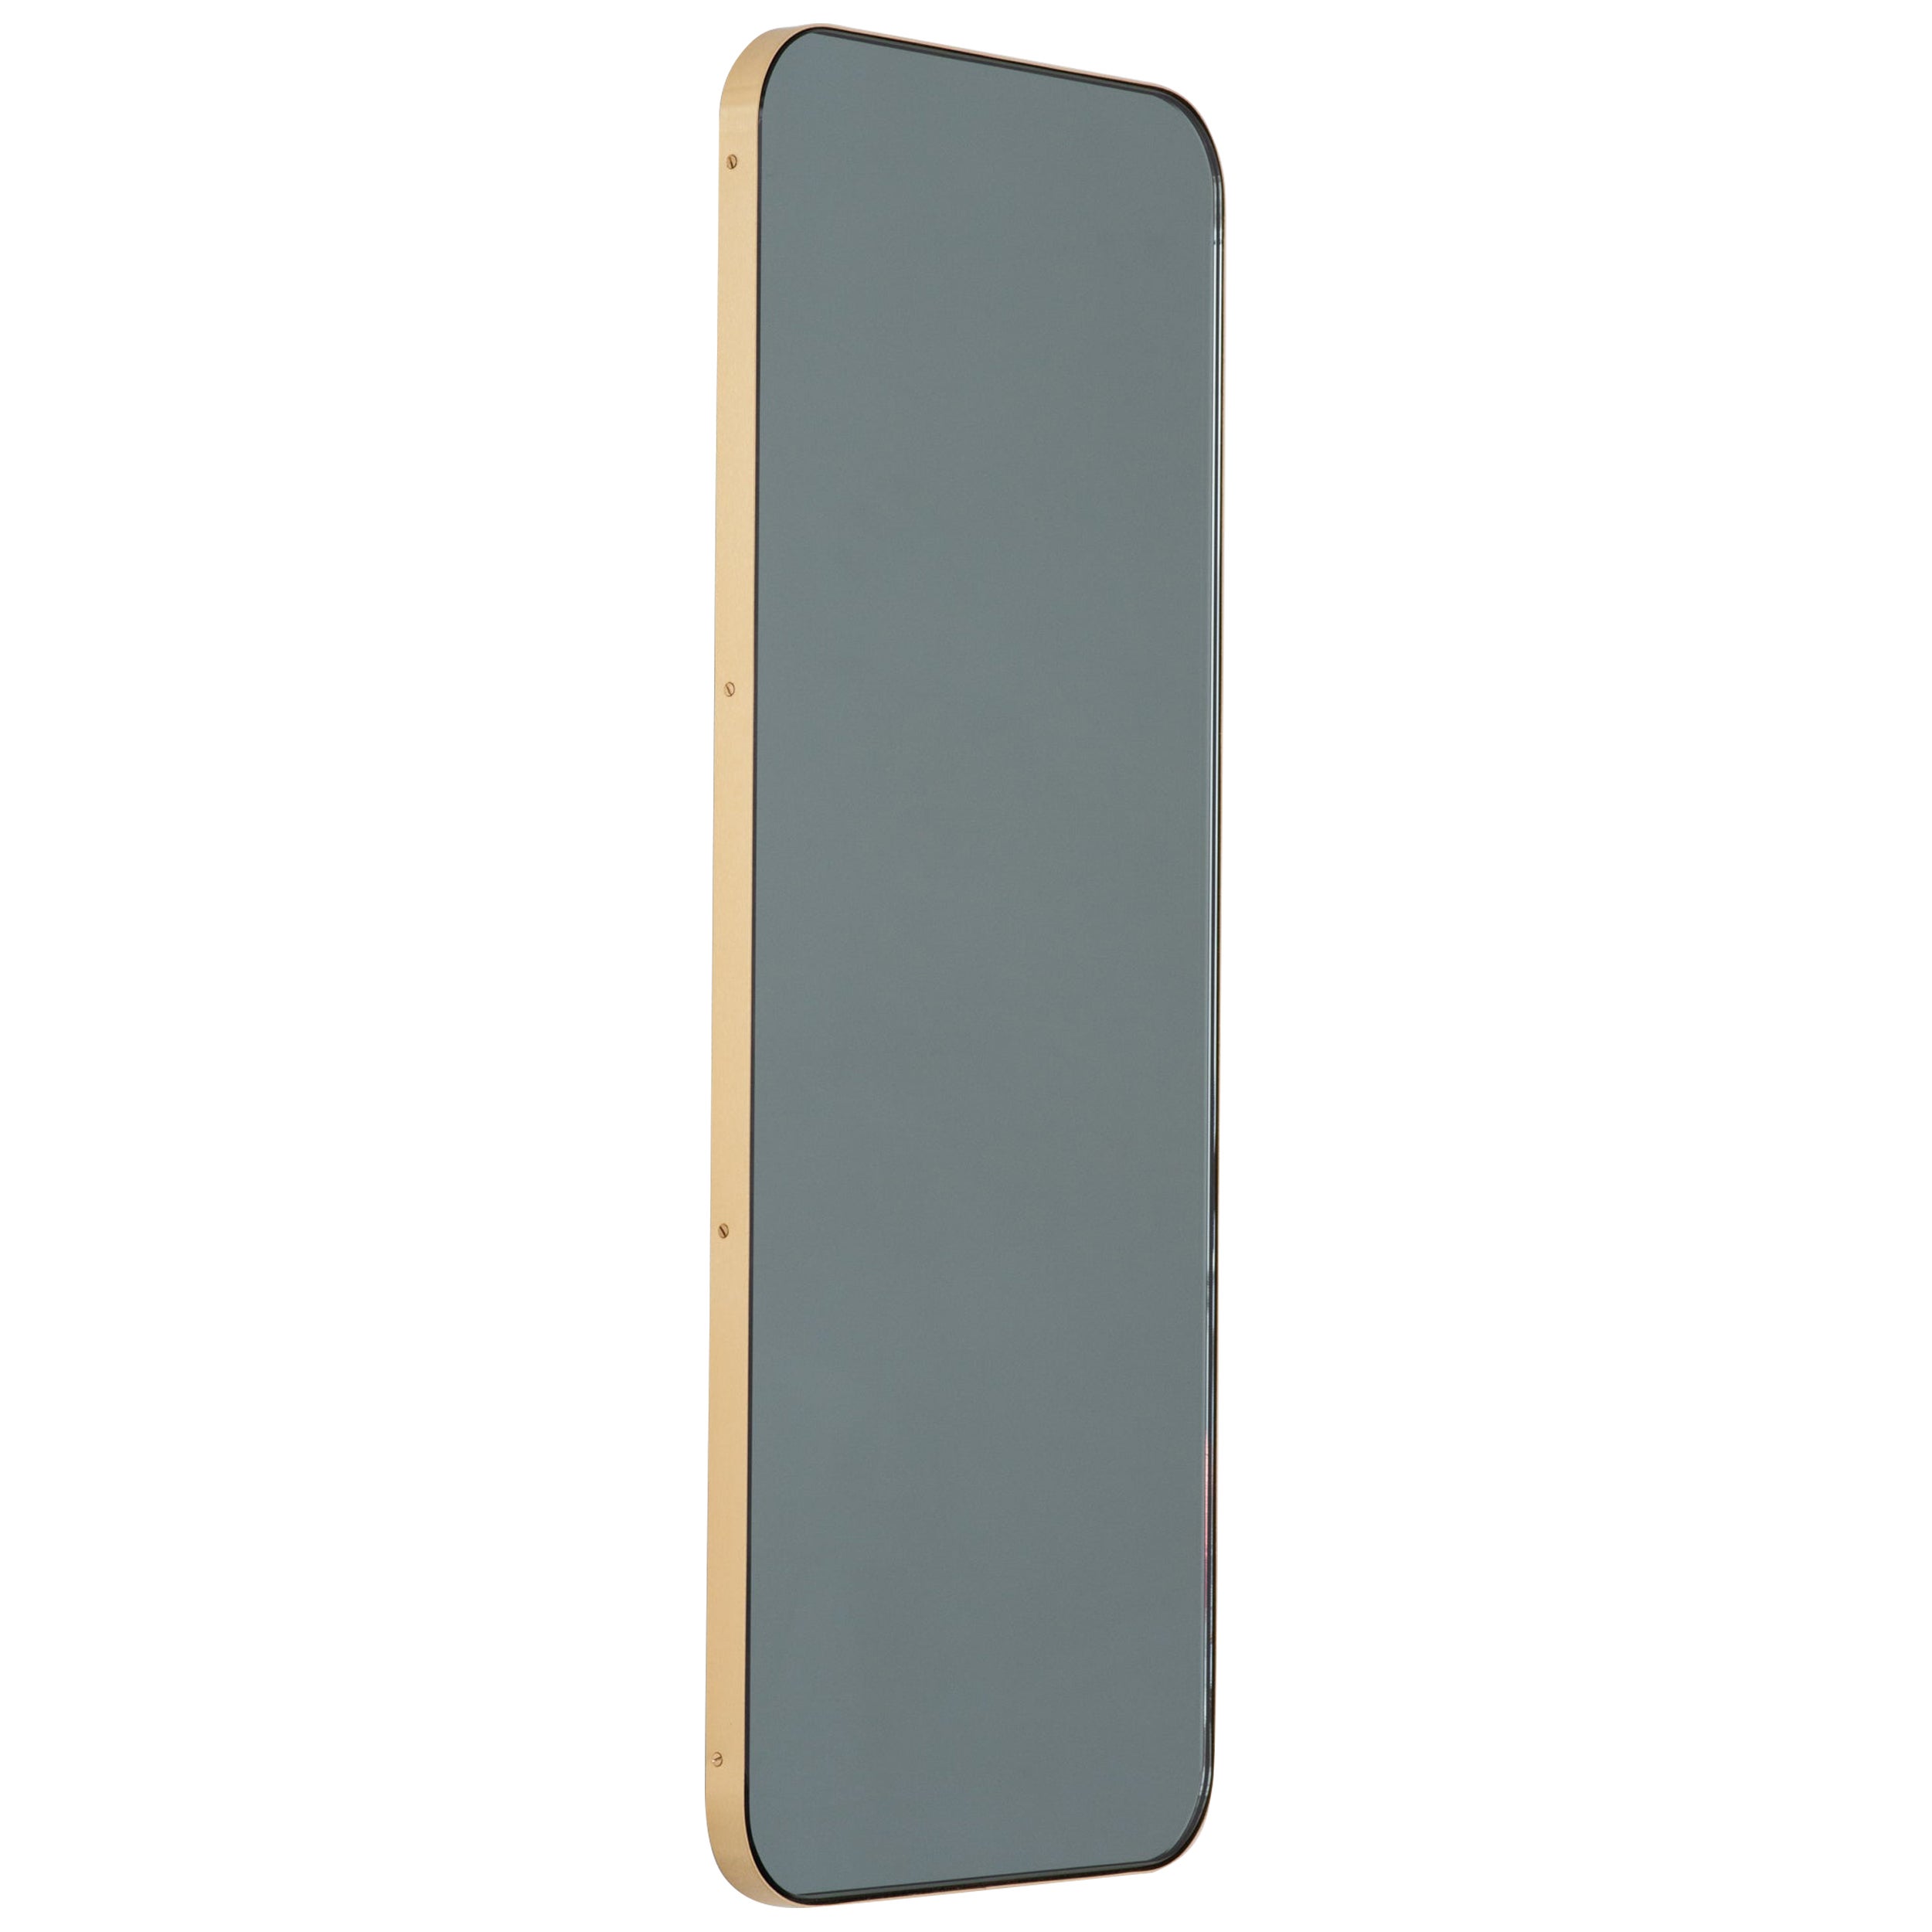 Quadris Black Tinted Rectangular Contemporary Mirror with a Brass Frame, Large For Sale